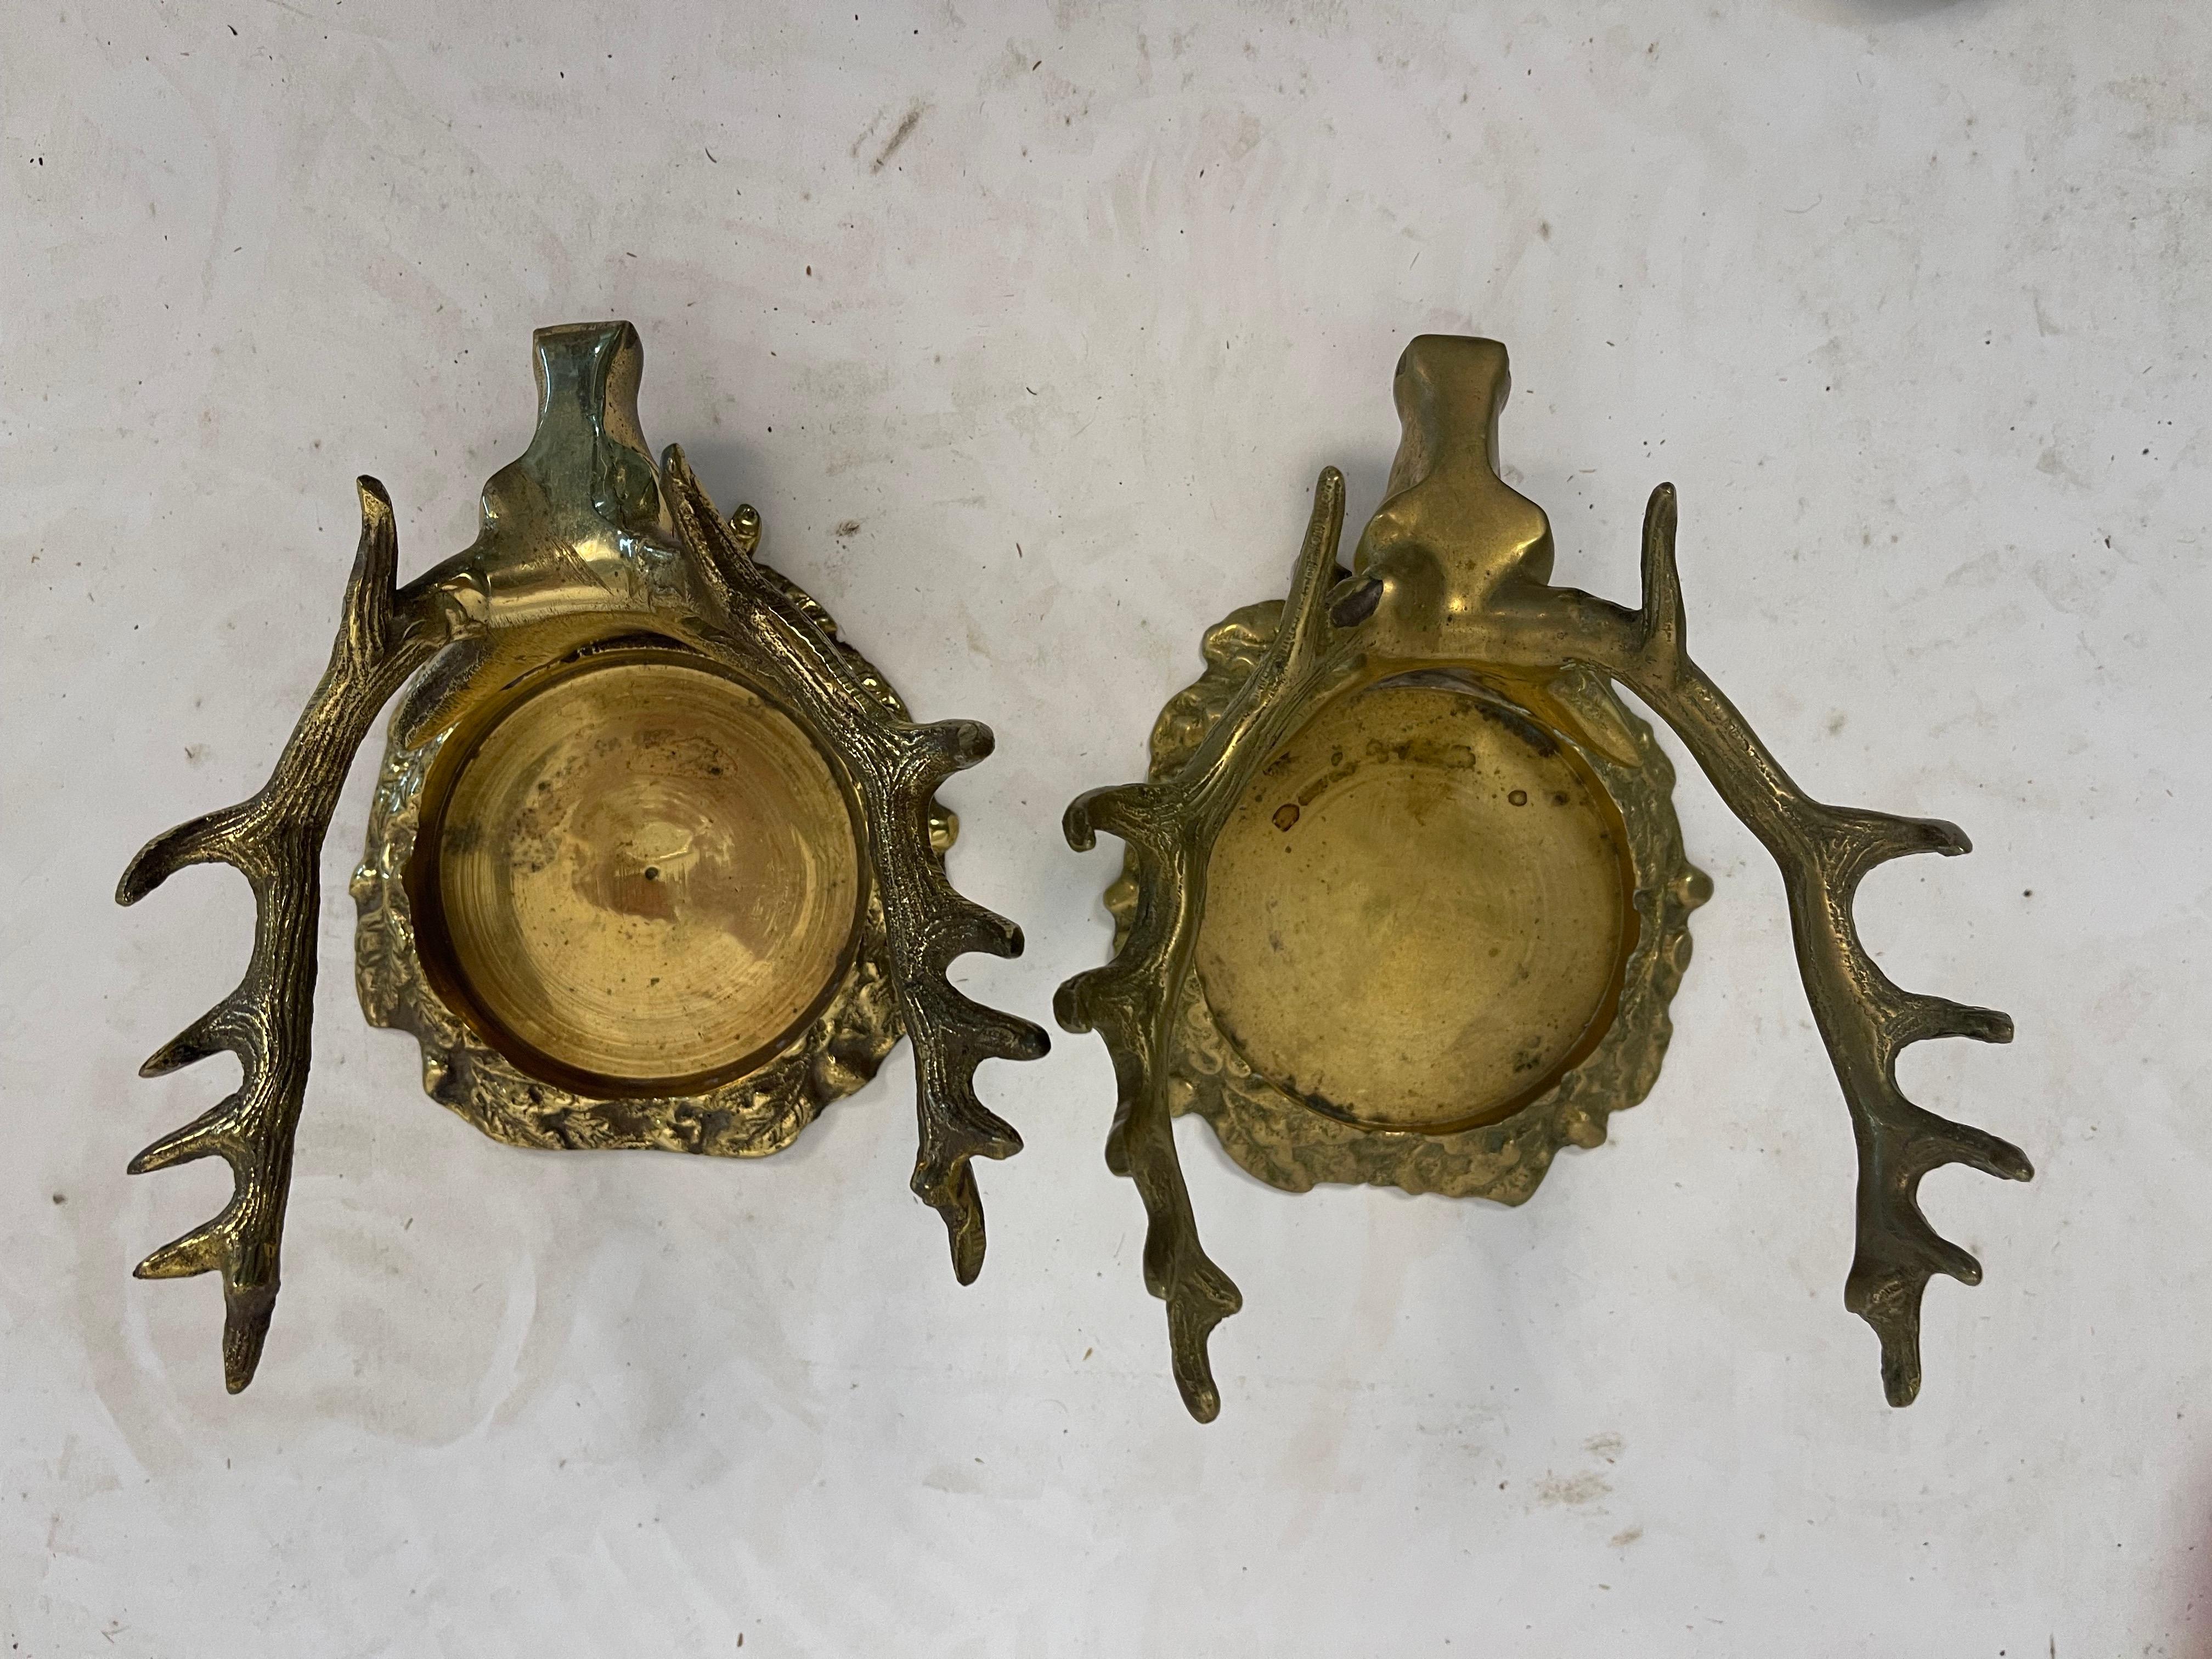 Stags Head Brass Wine Bottle Holders In Good Condition For Sale In Essex, MA